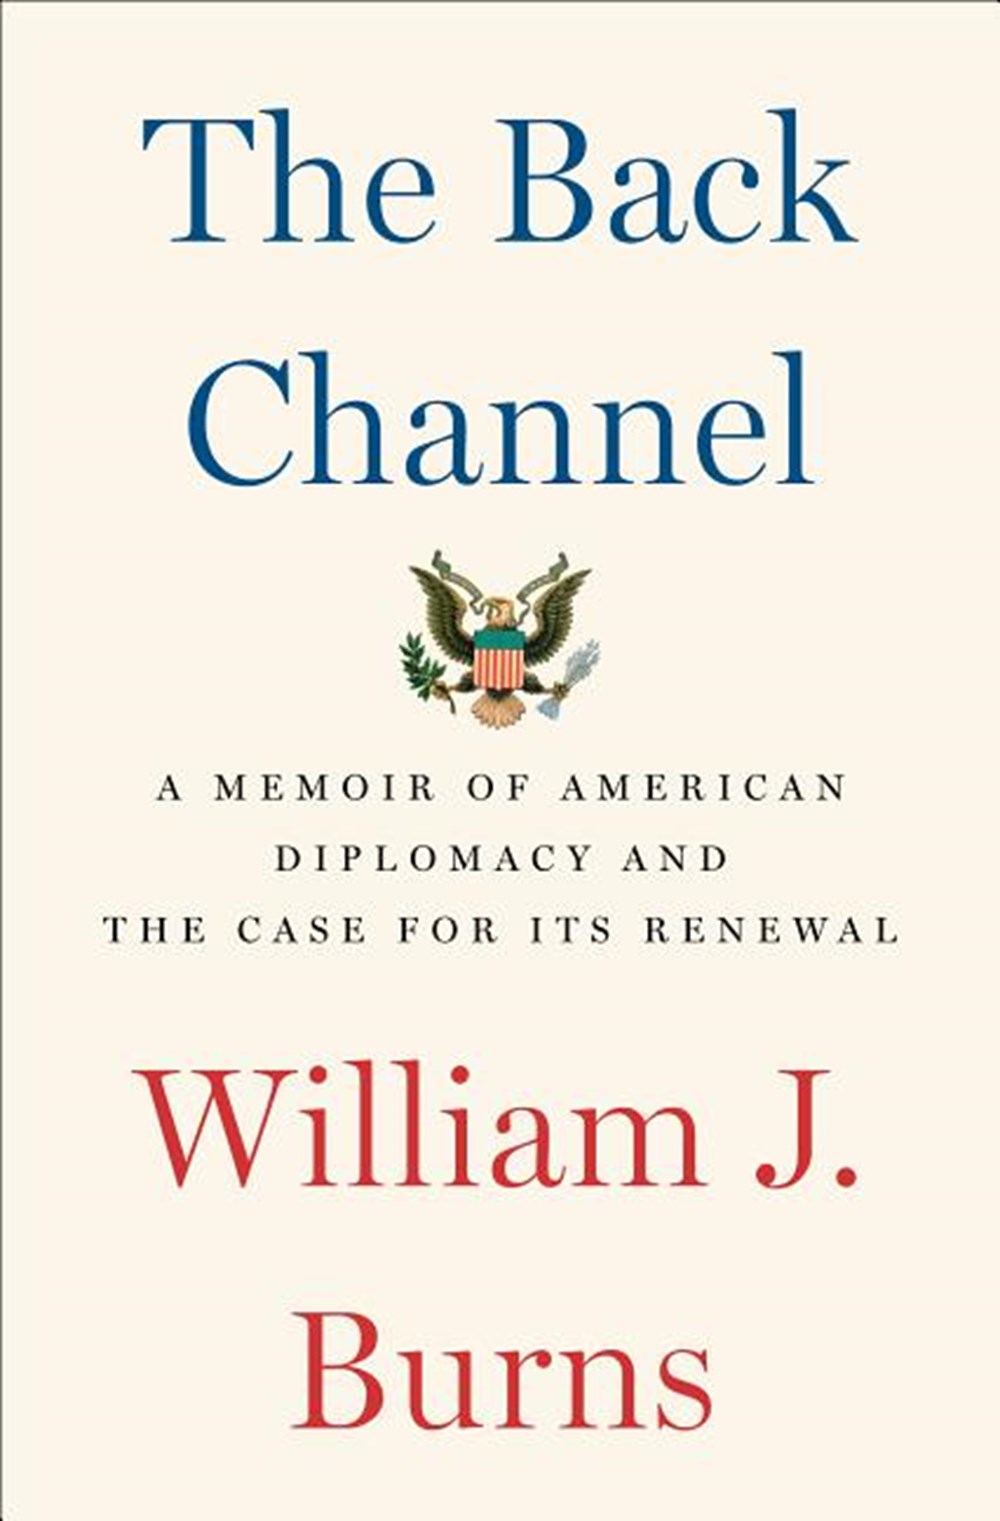 Back Channel: A Memoir of American Diplomacy and the Case for Its Renewal